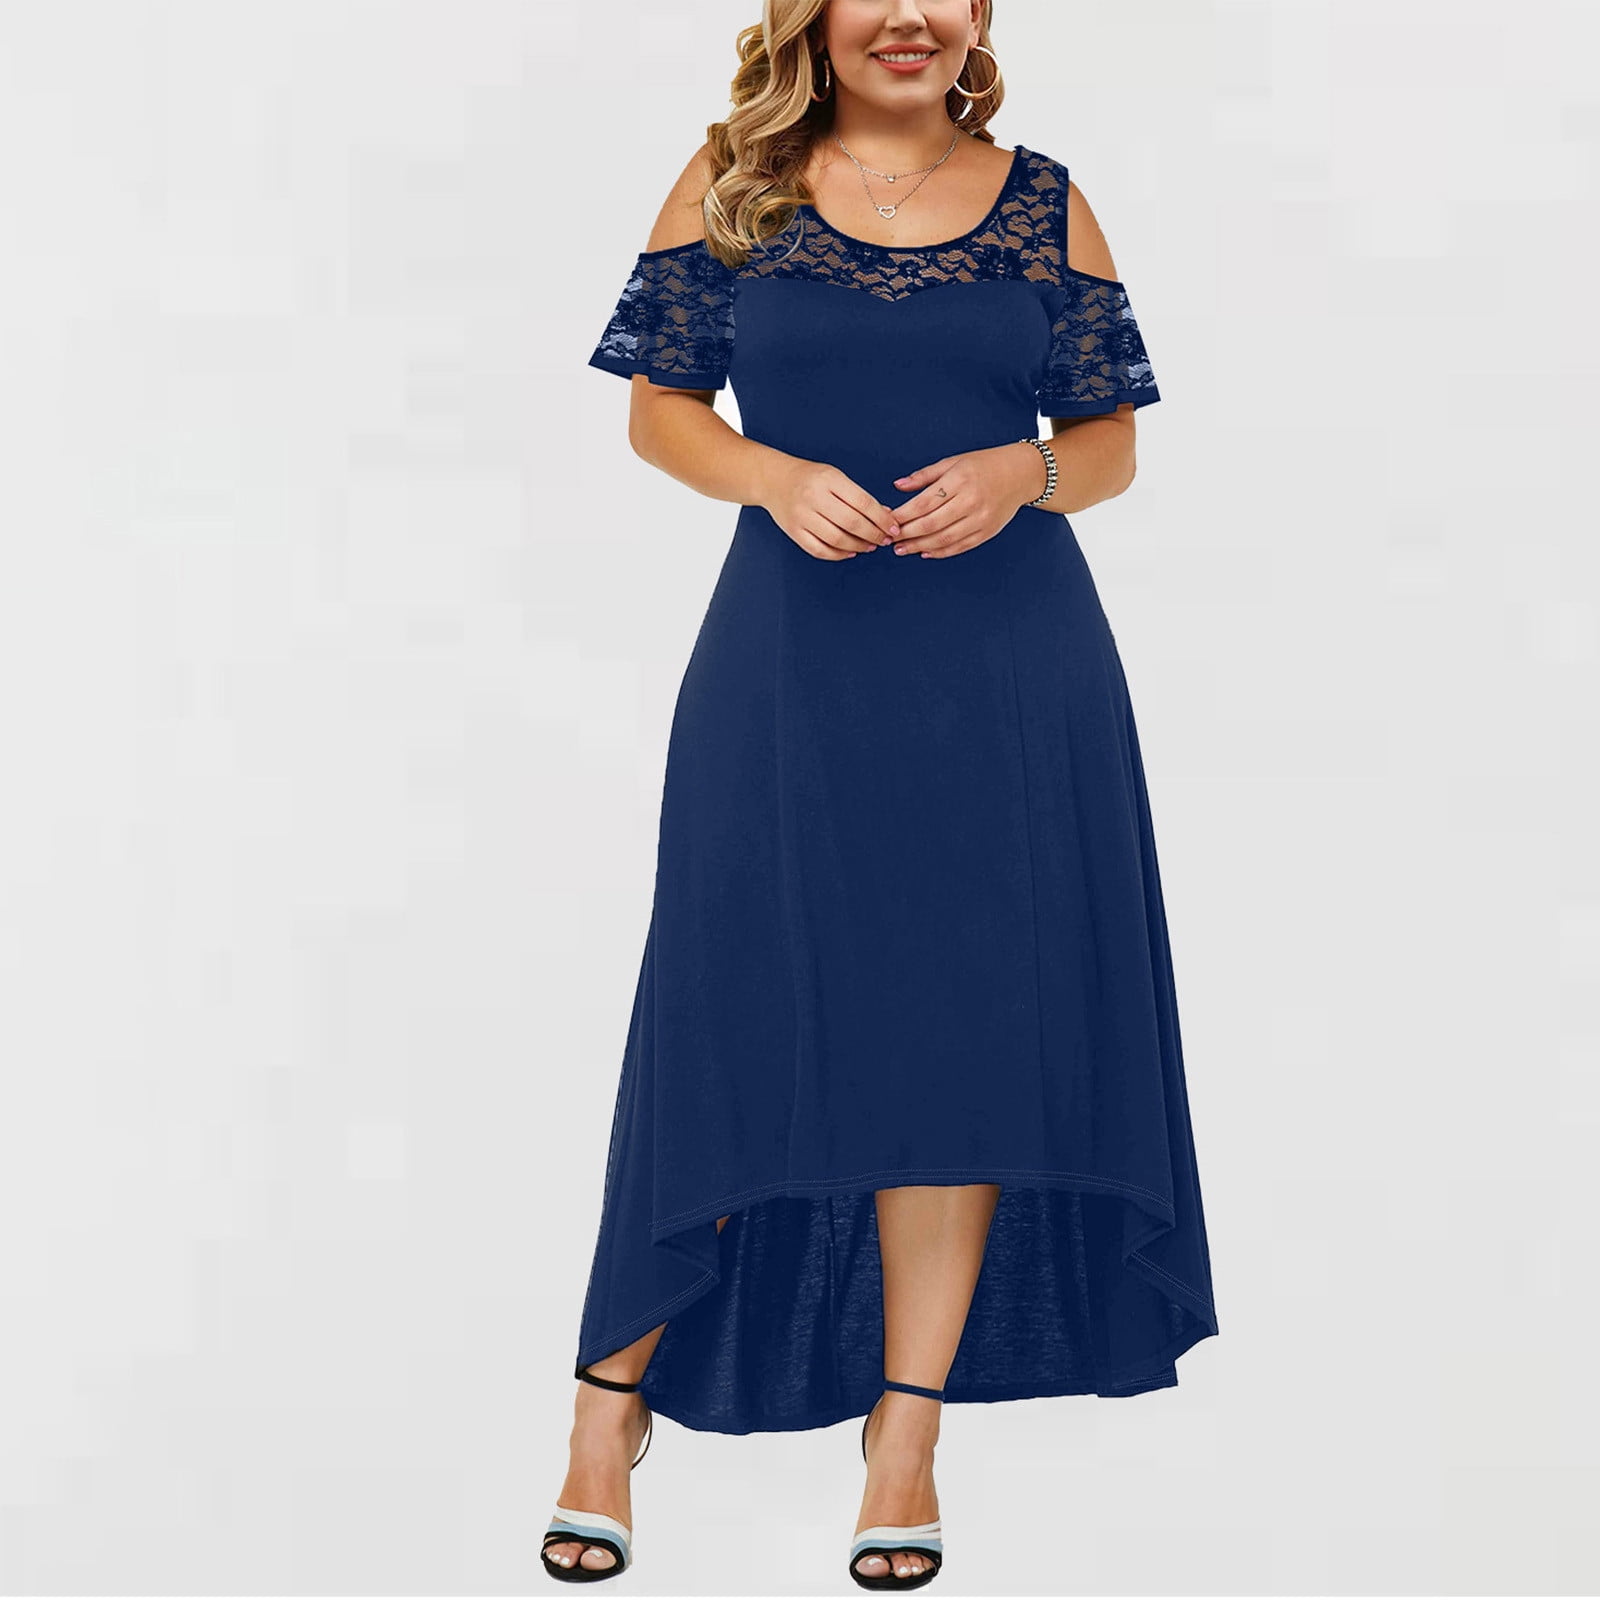 Festive Fashion for All: Plus Size Work Christmas Party Dresses That S -  Ever-Pretty US